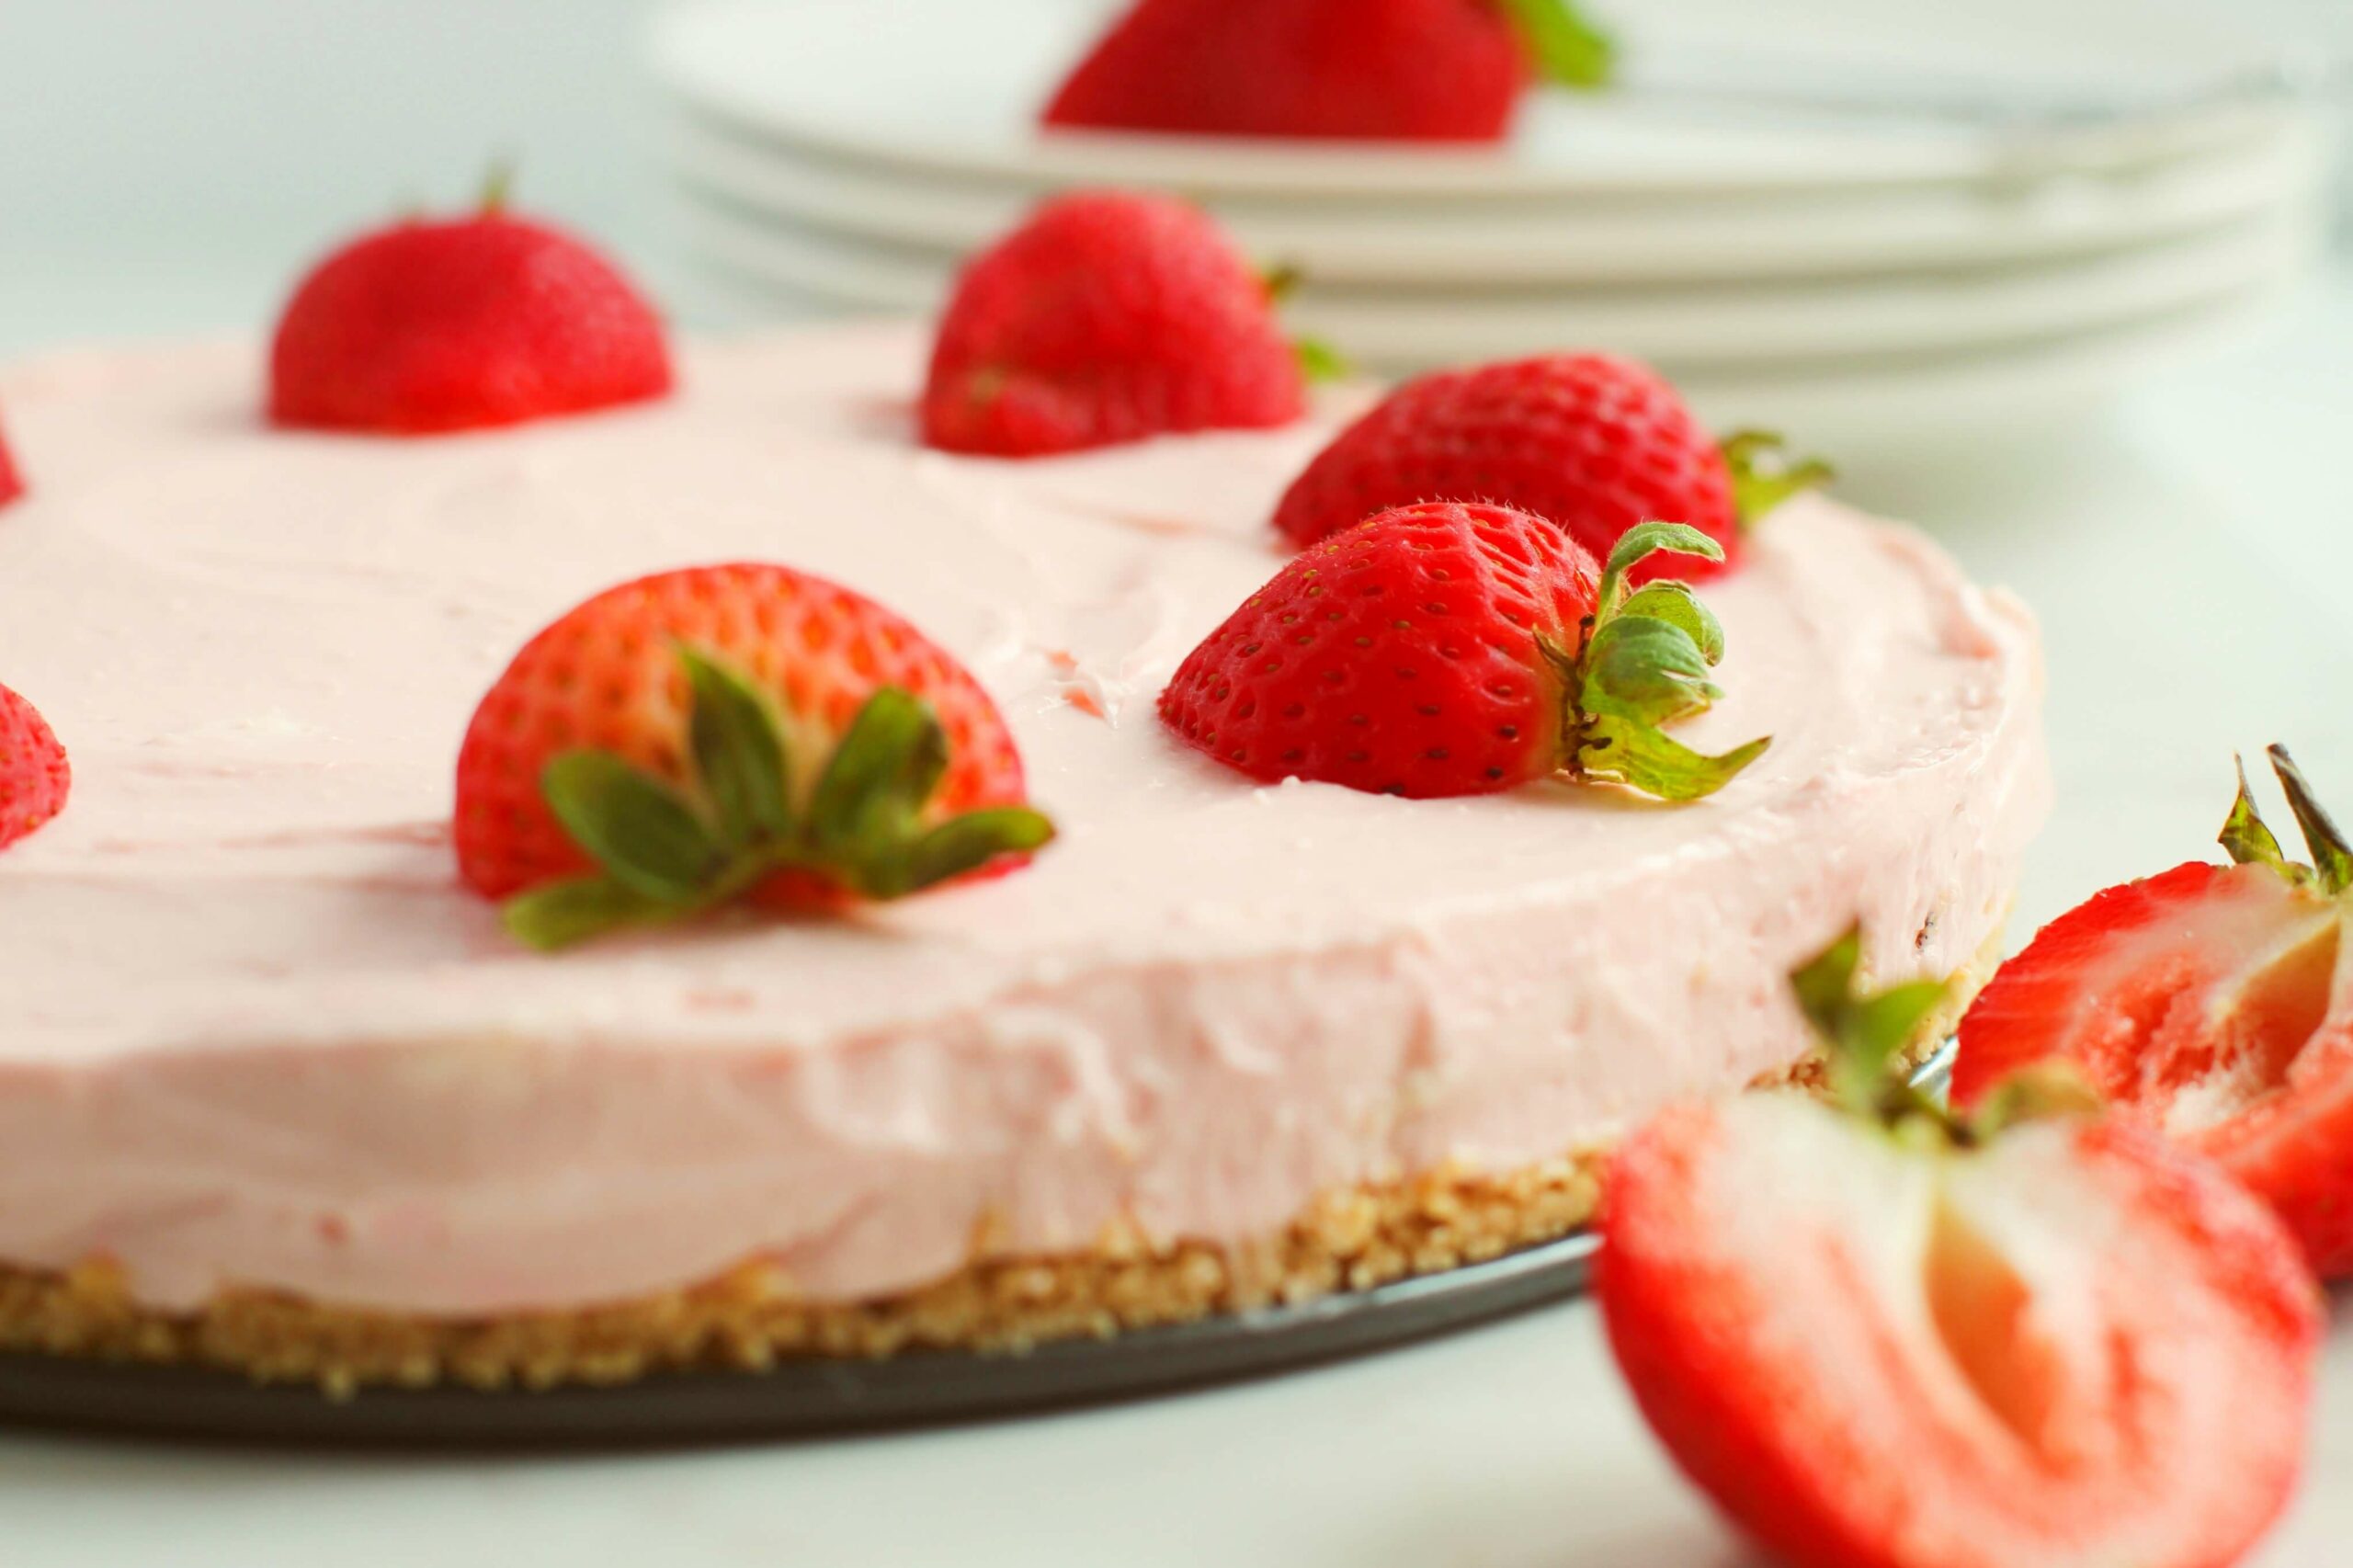 A side view of the no bake cheesecake.